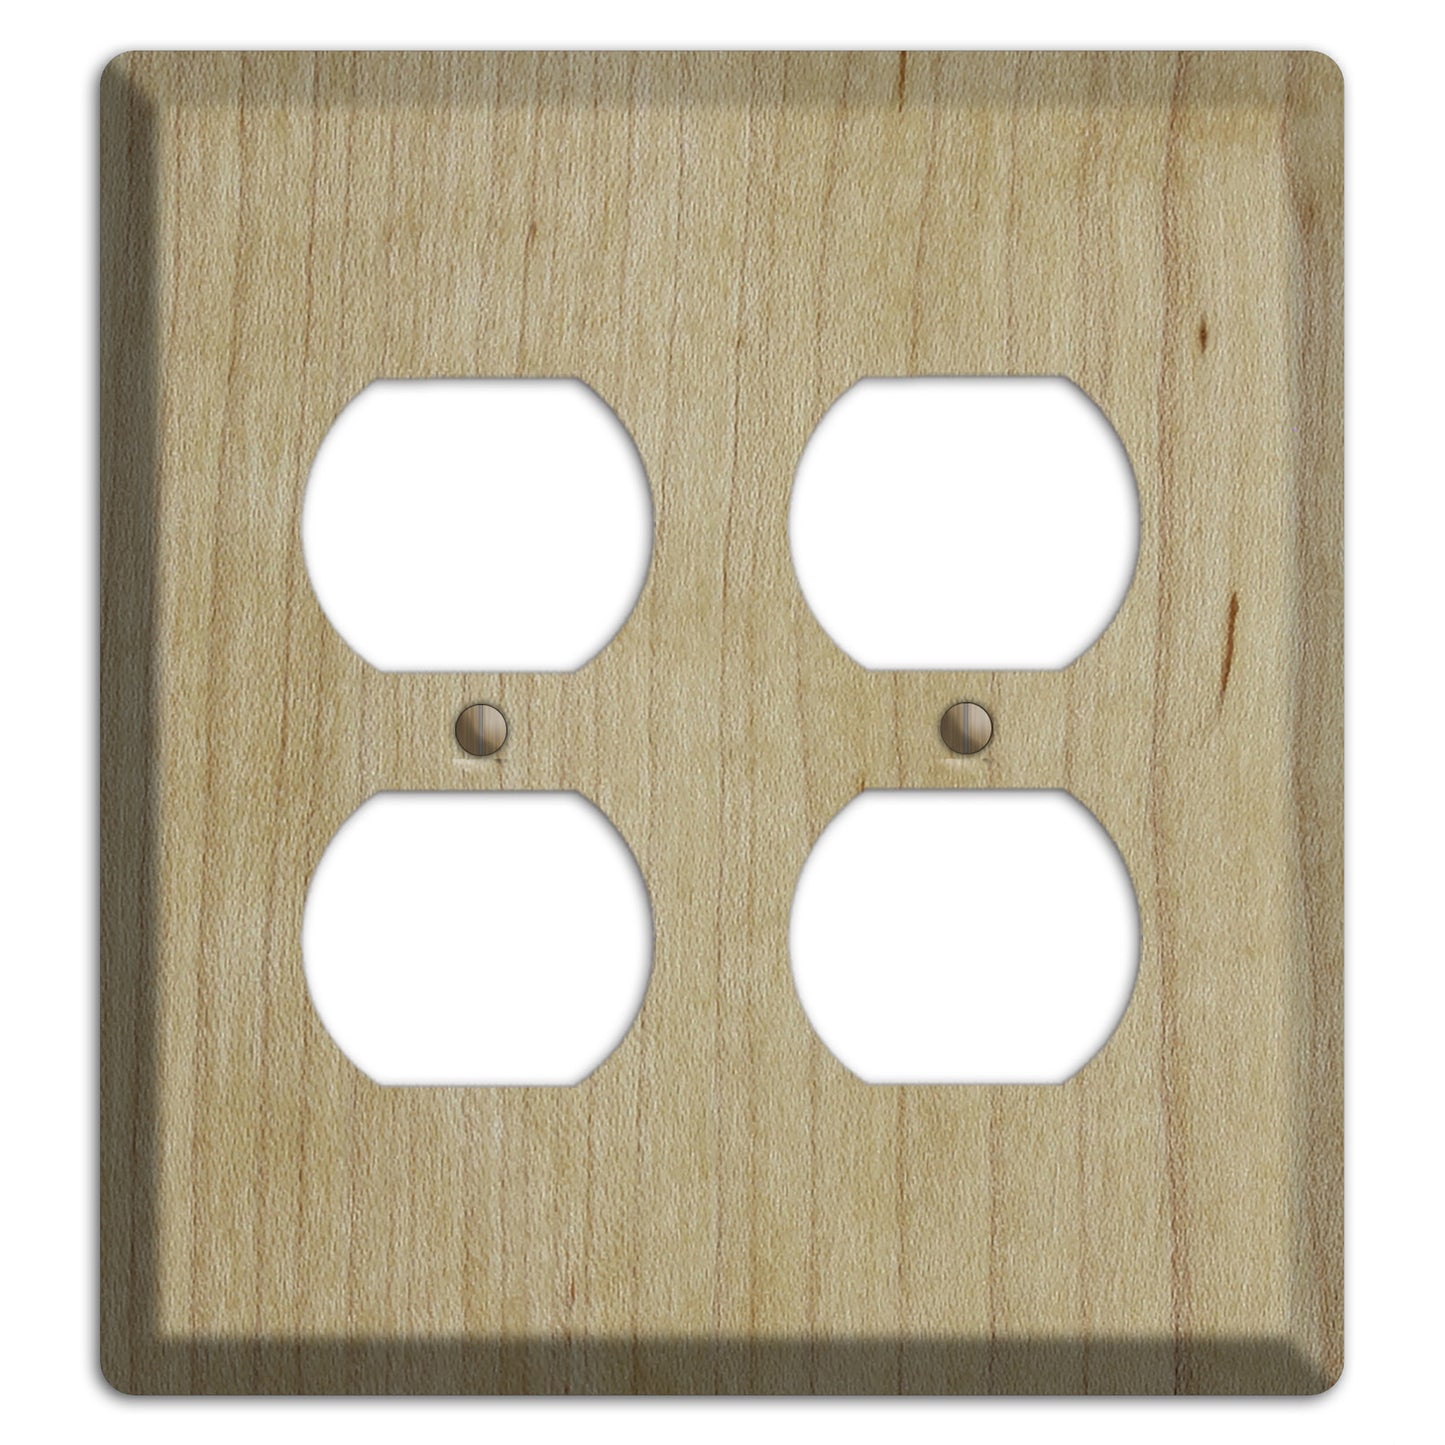 Unfinished Maple Wood 2 Duplex Outlet Cover Plate